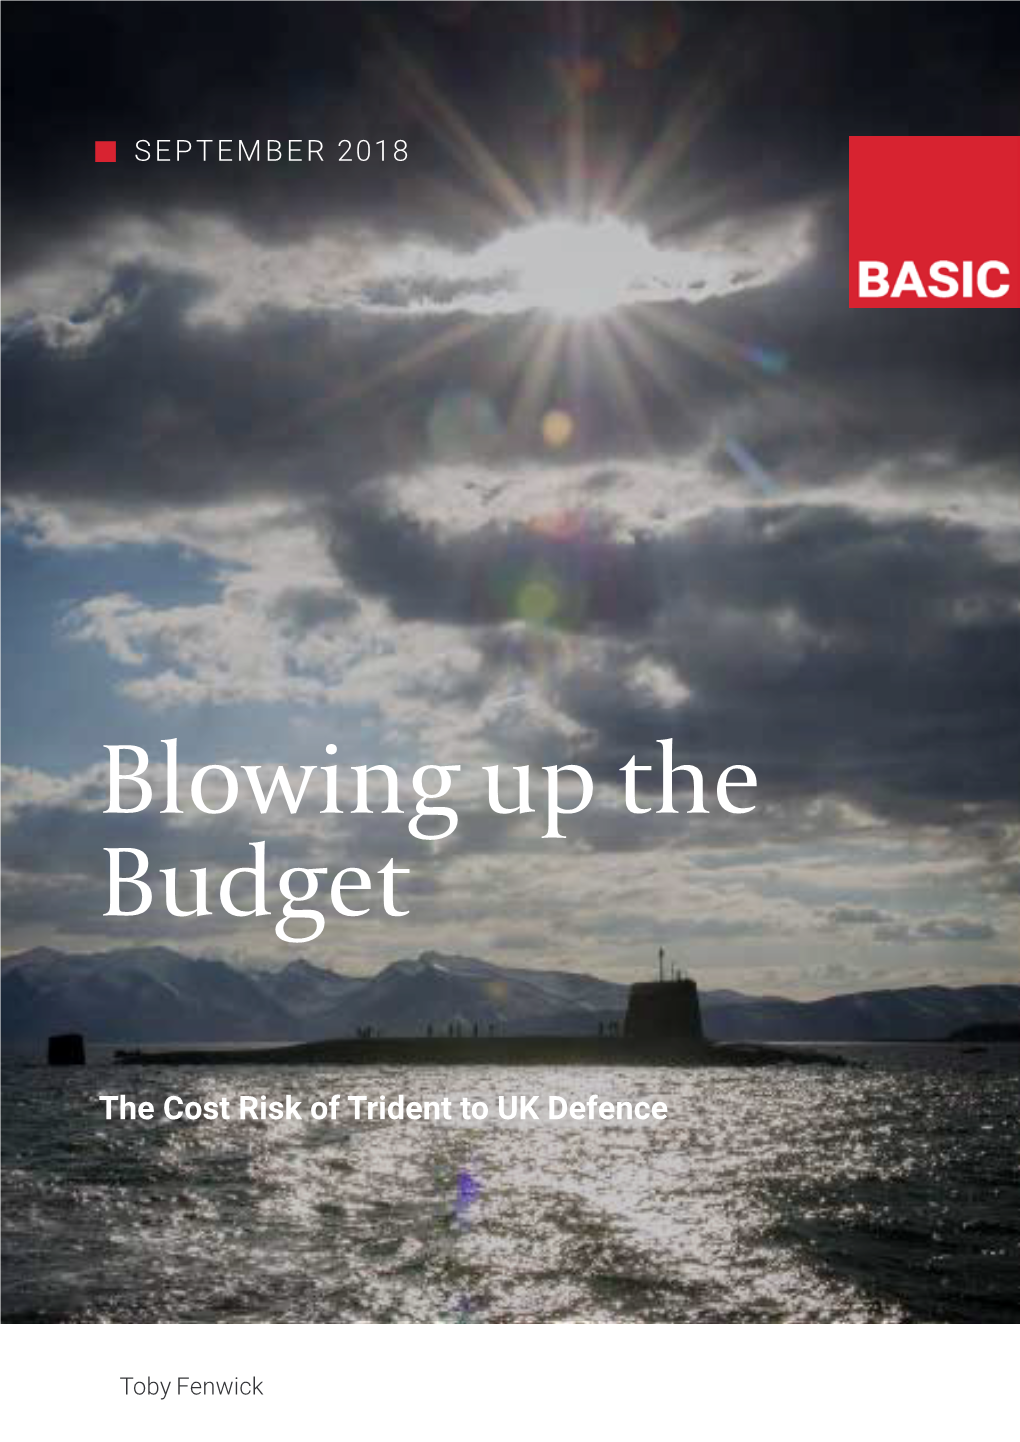 Blowing up the Budget